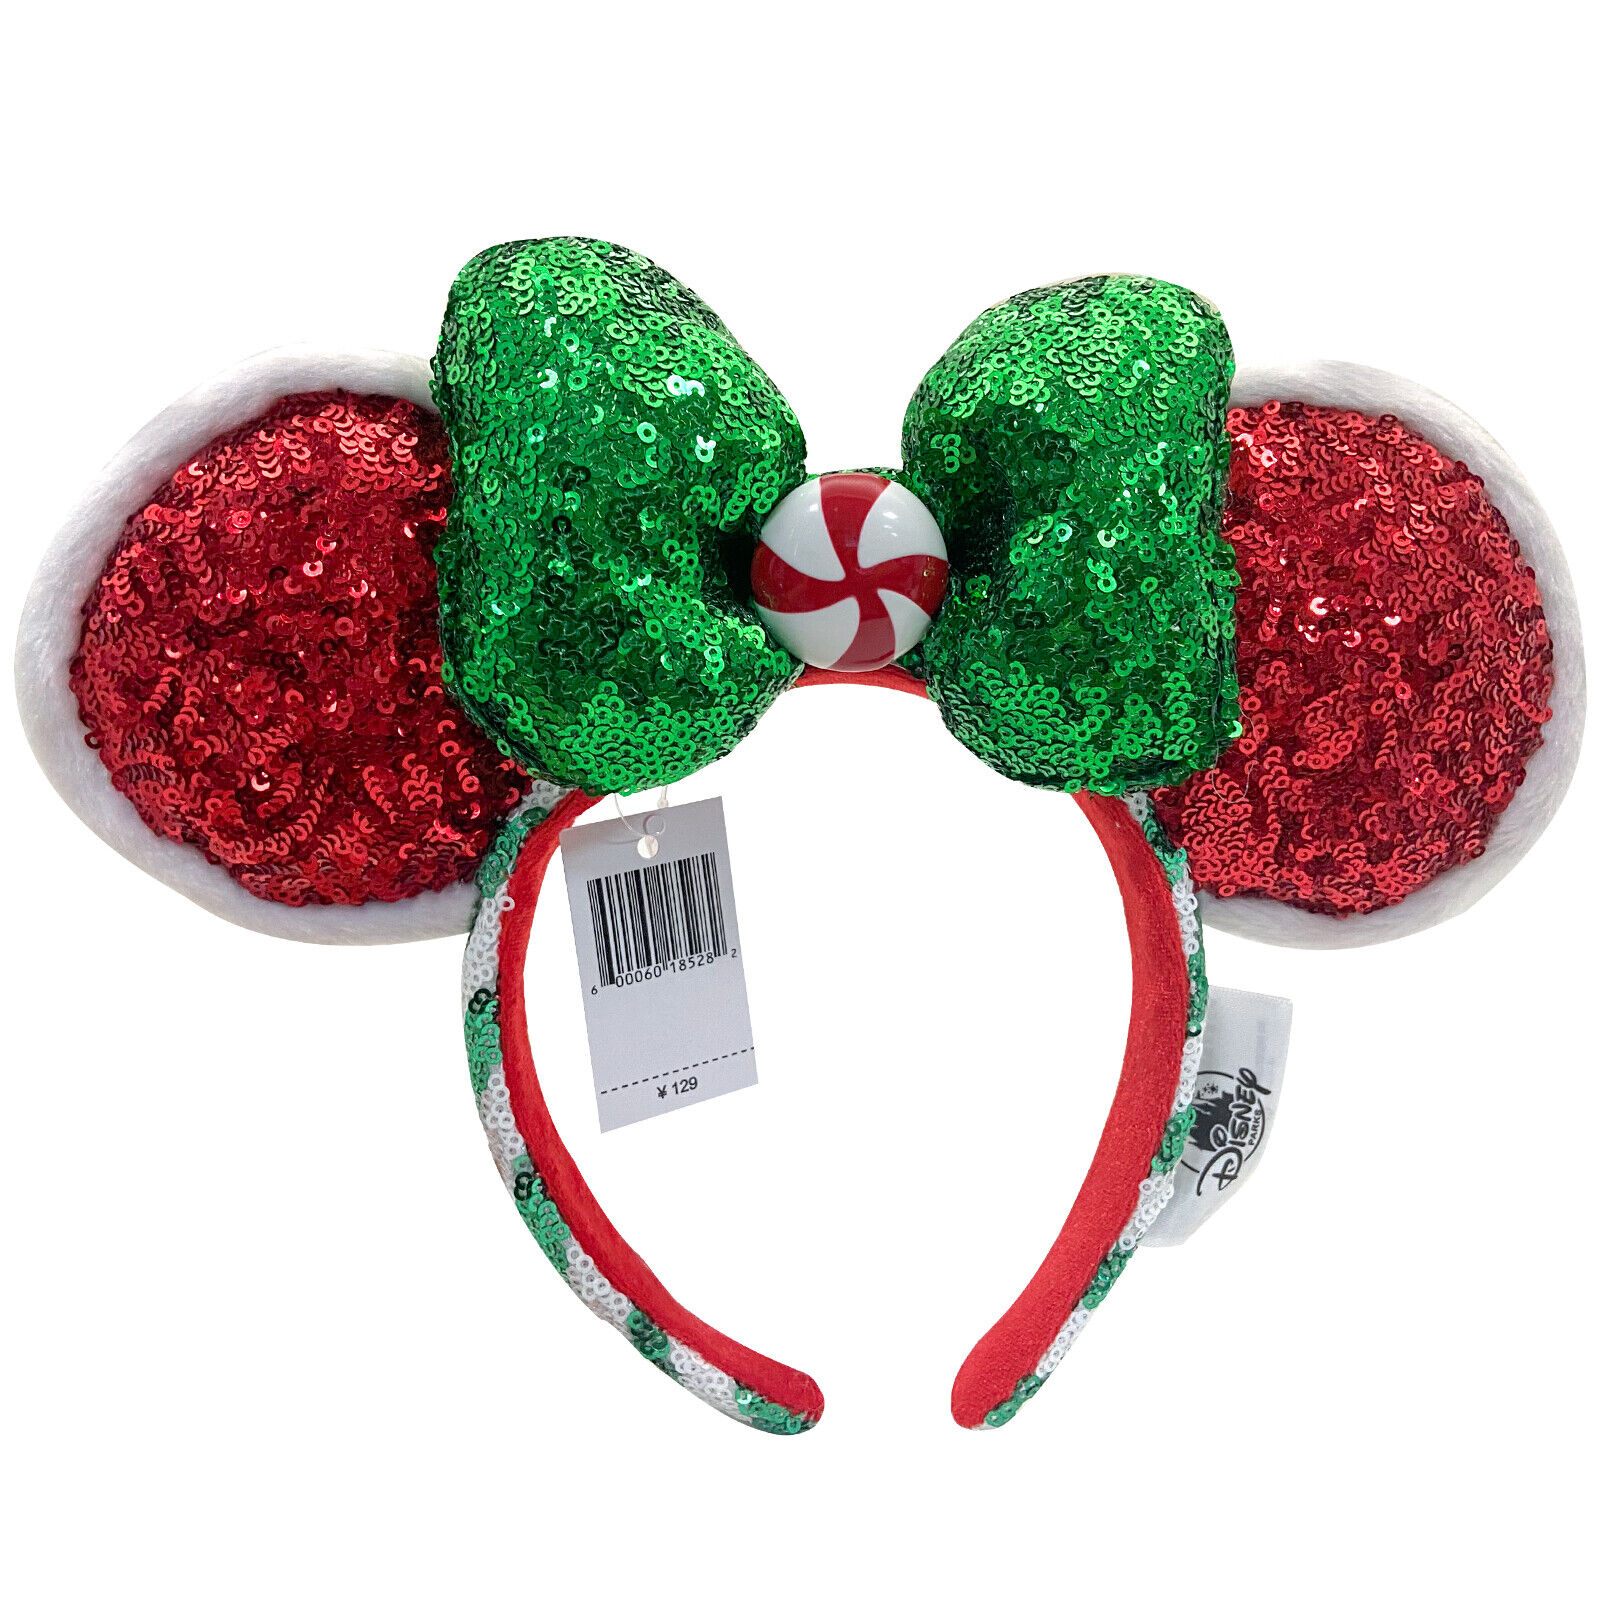 DisneyParks Green Sequin Minnie Mouse Bow Red Sequins Ears Headband Ears New